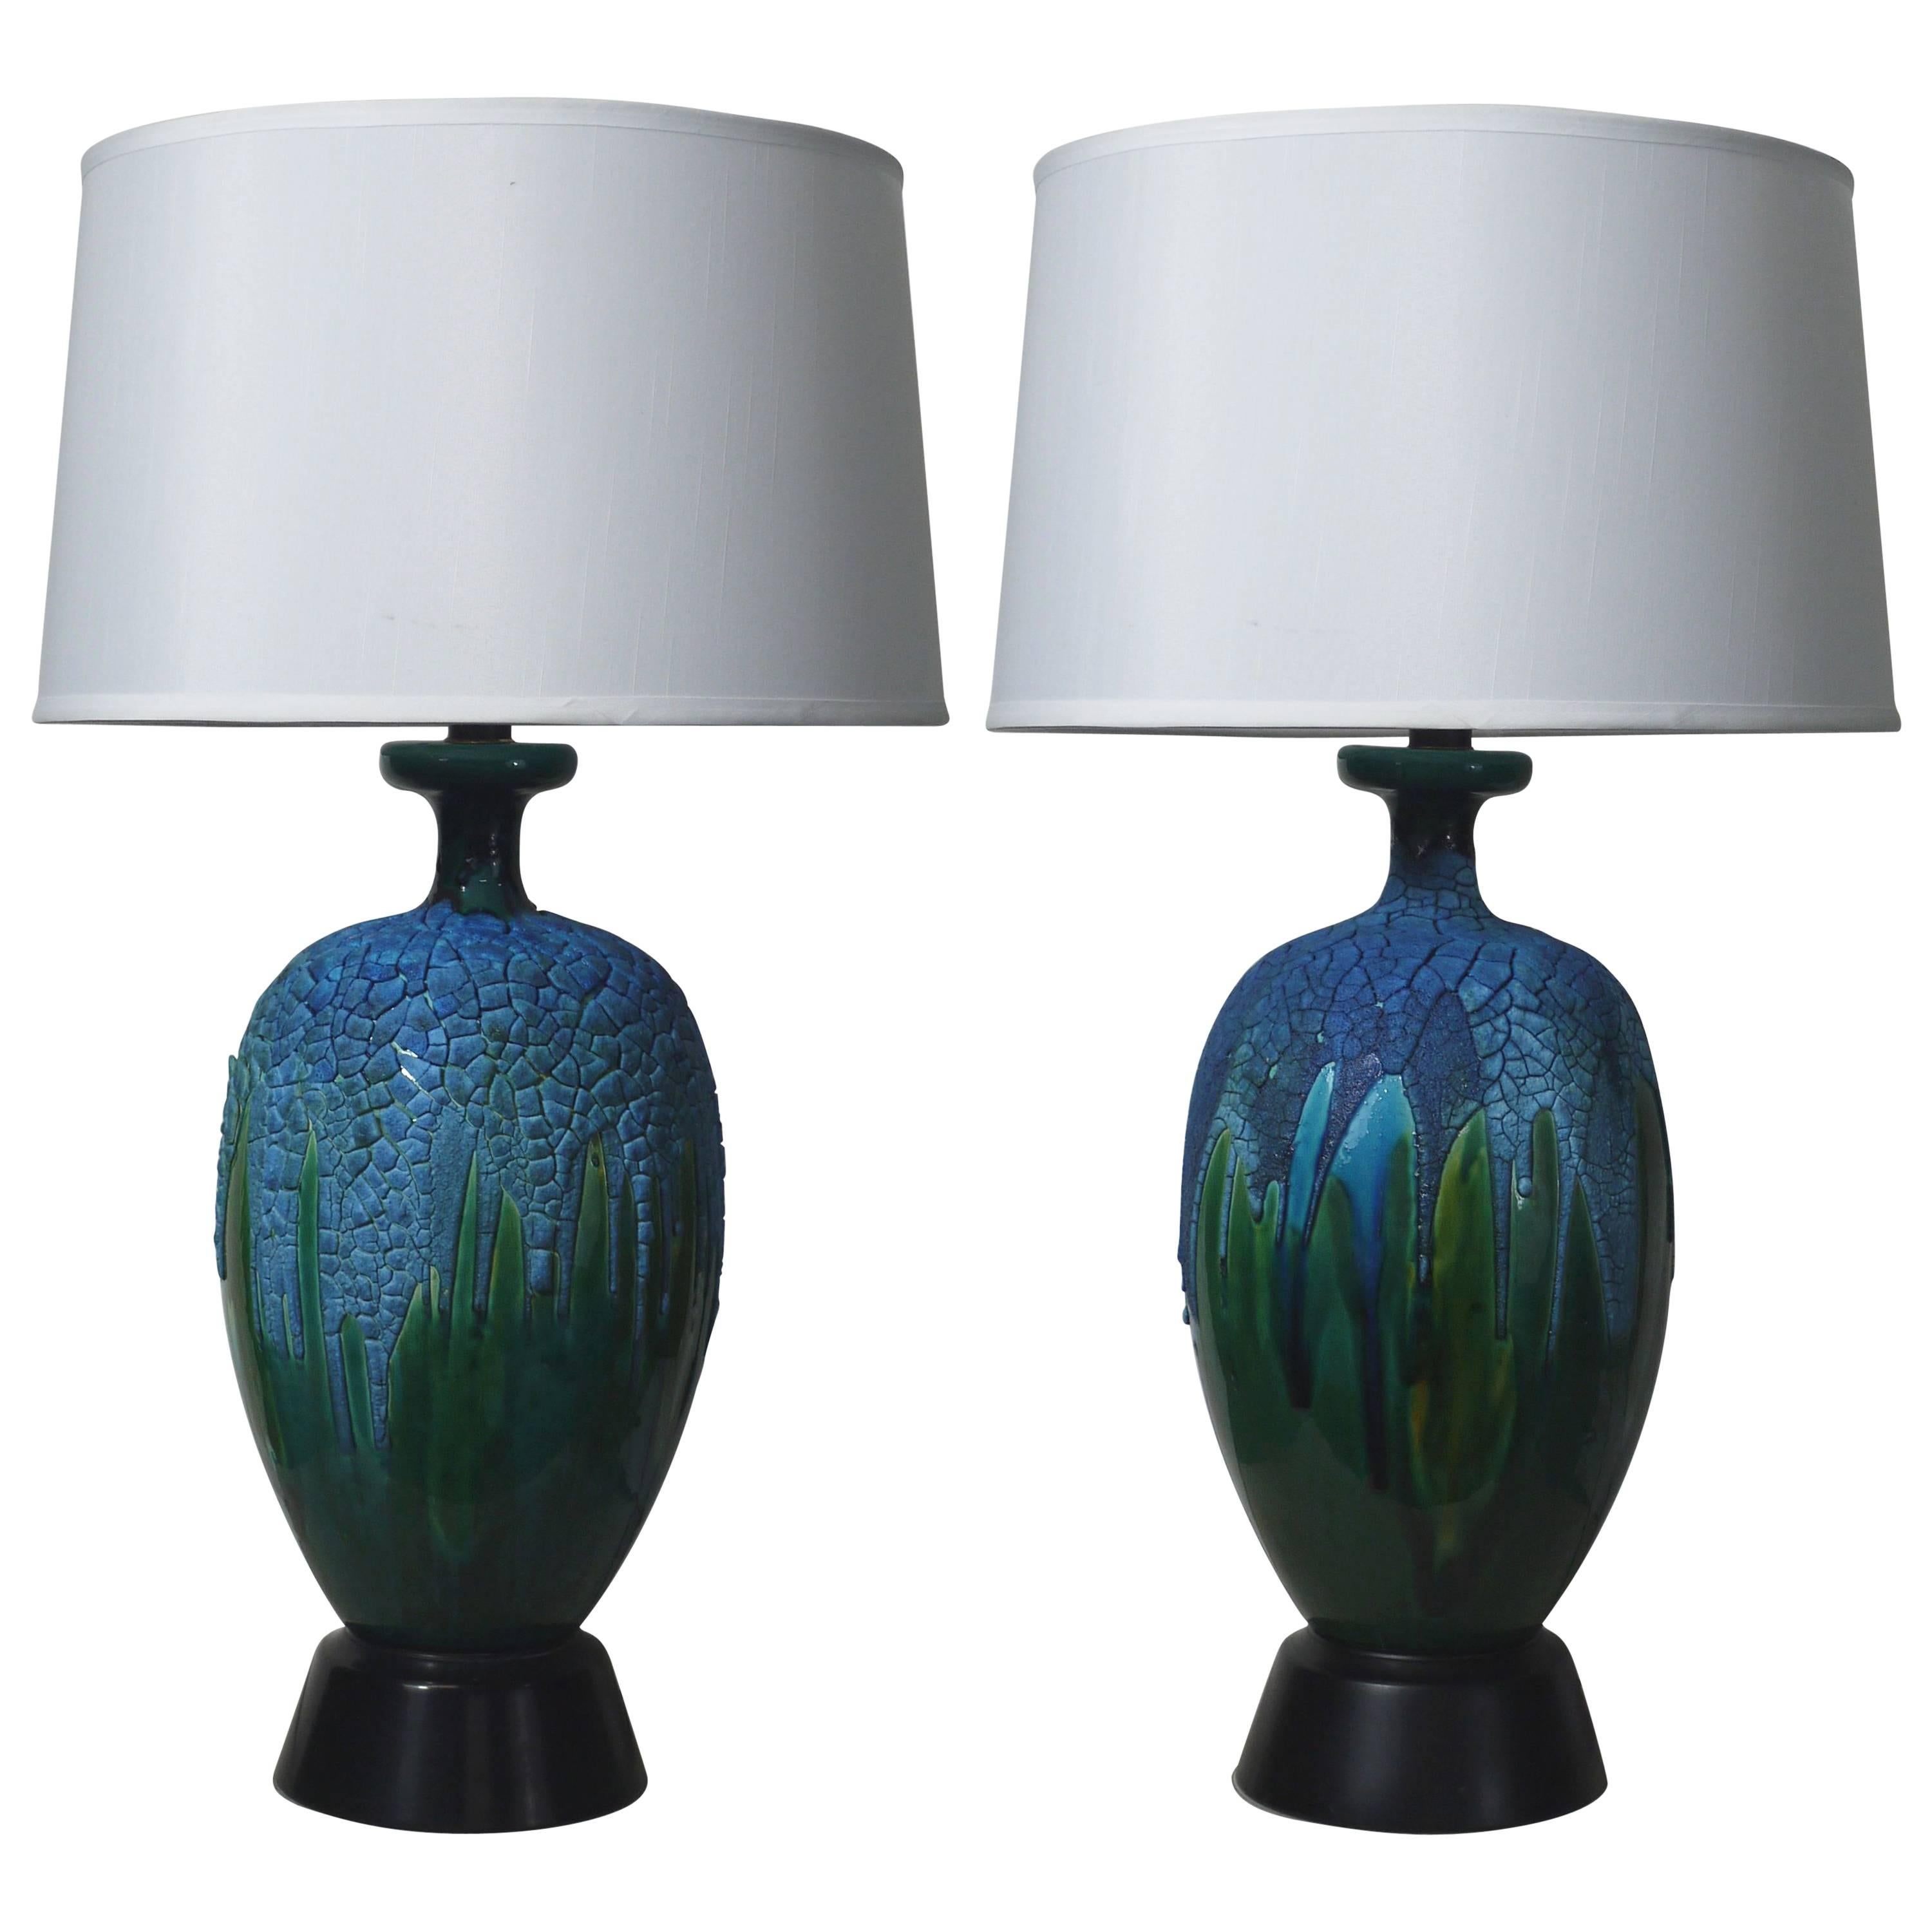 Pair of Lapis Blue and Emerald Green Crackled Lava Glaze Lamps